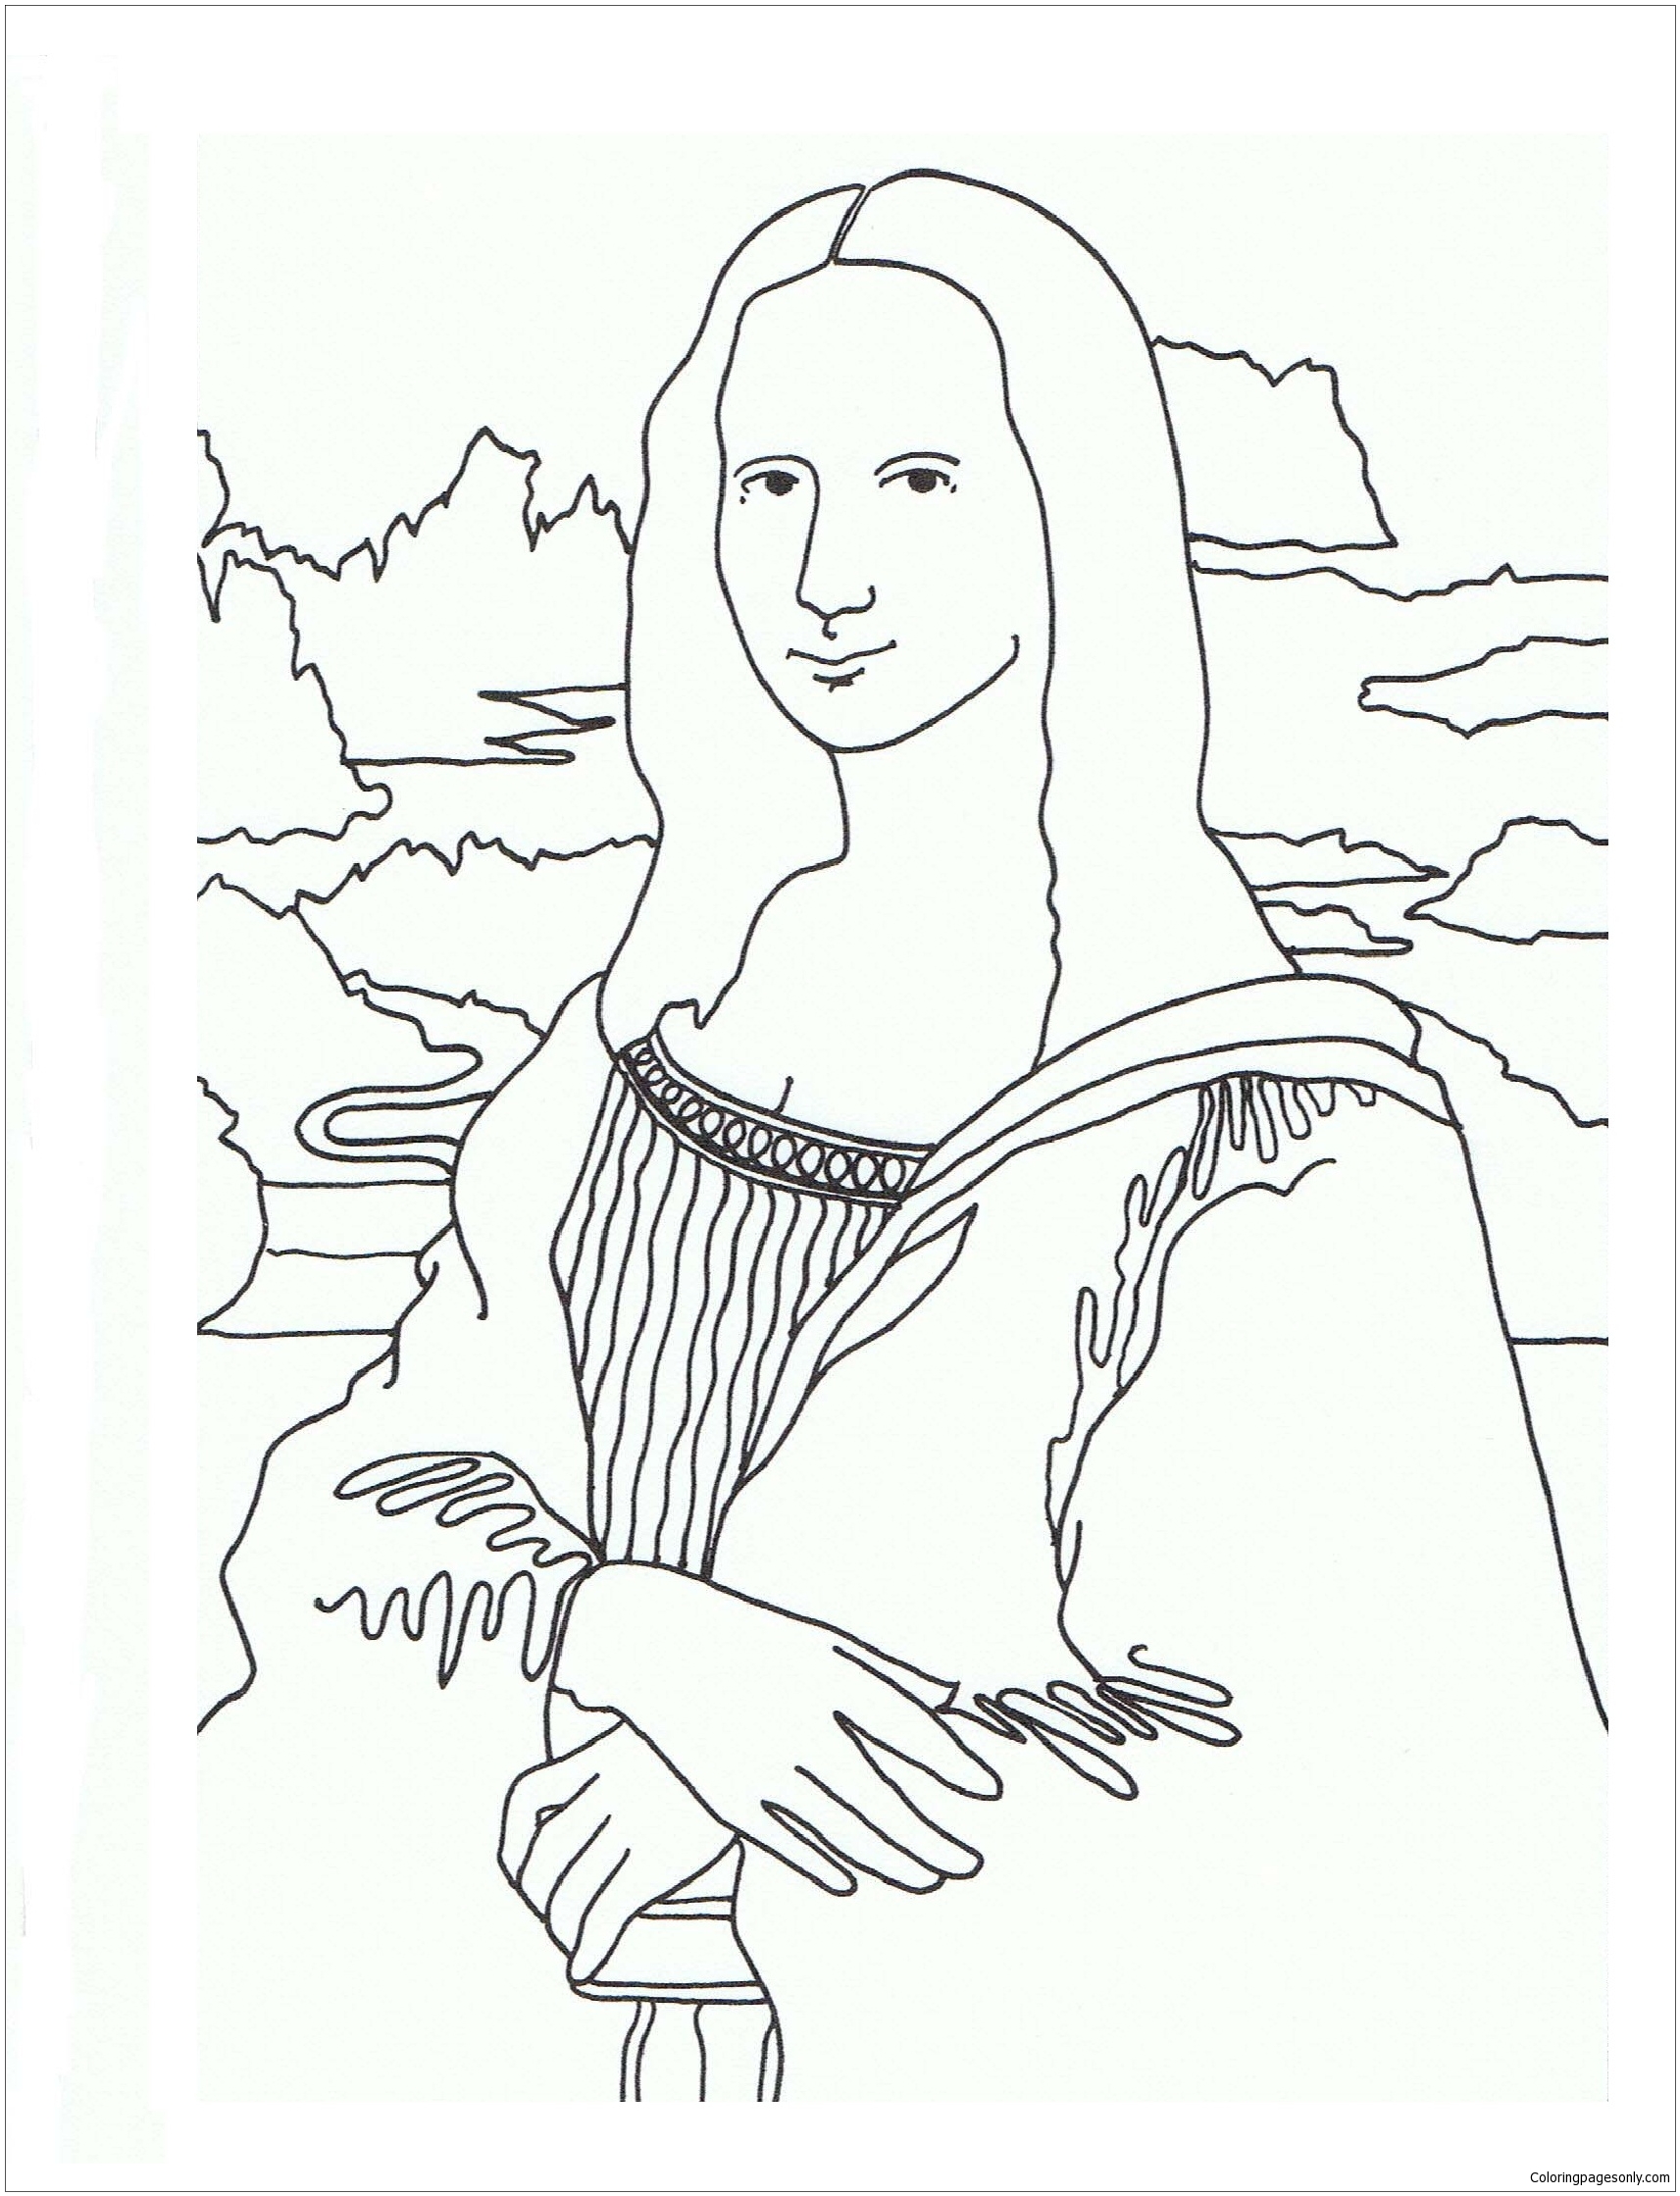 Download Mona Lisa Line Drawing at PaintingValley.com | Explore ...